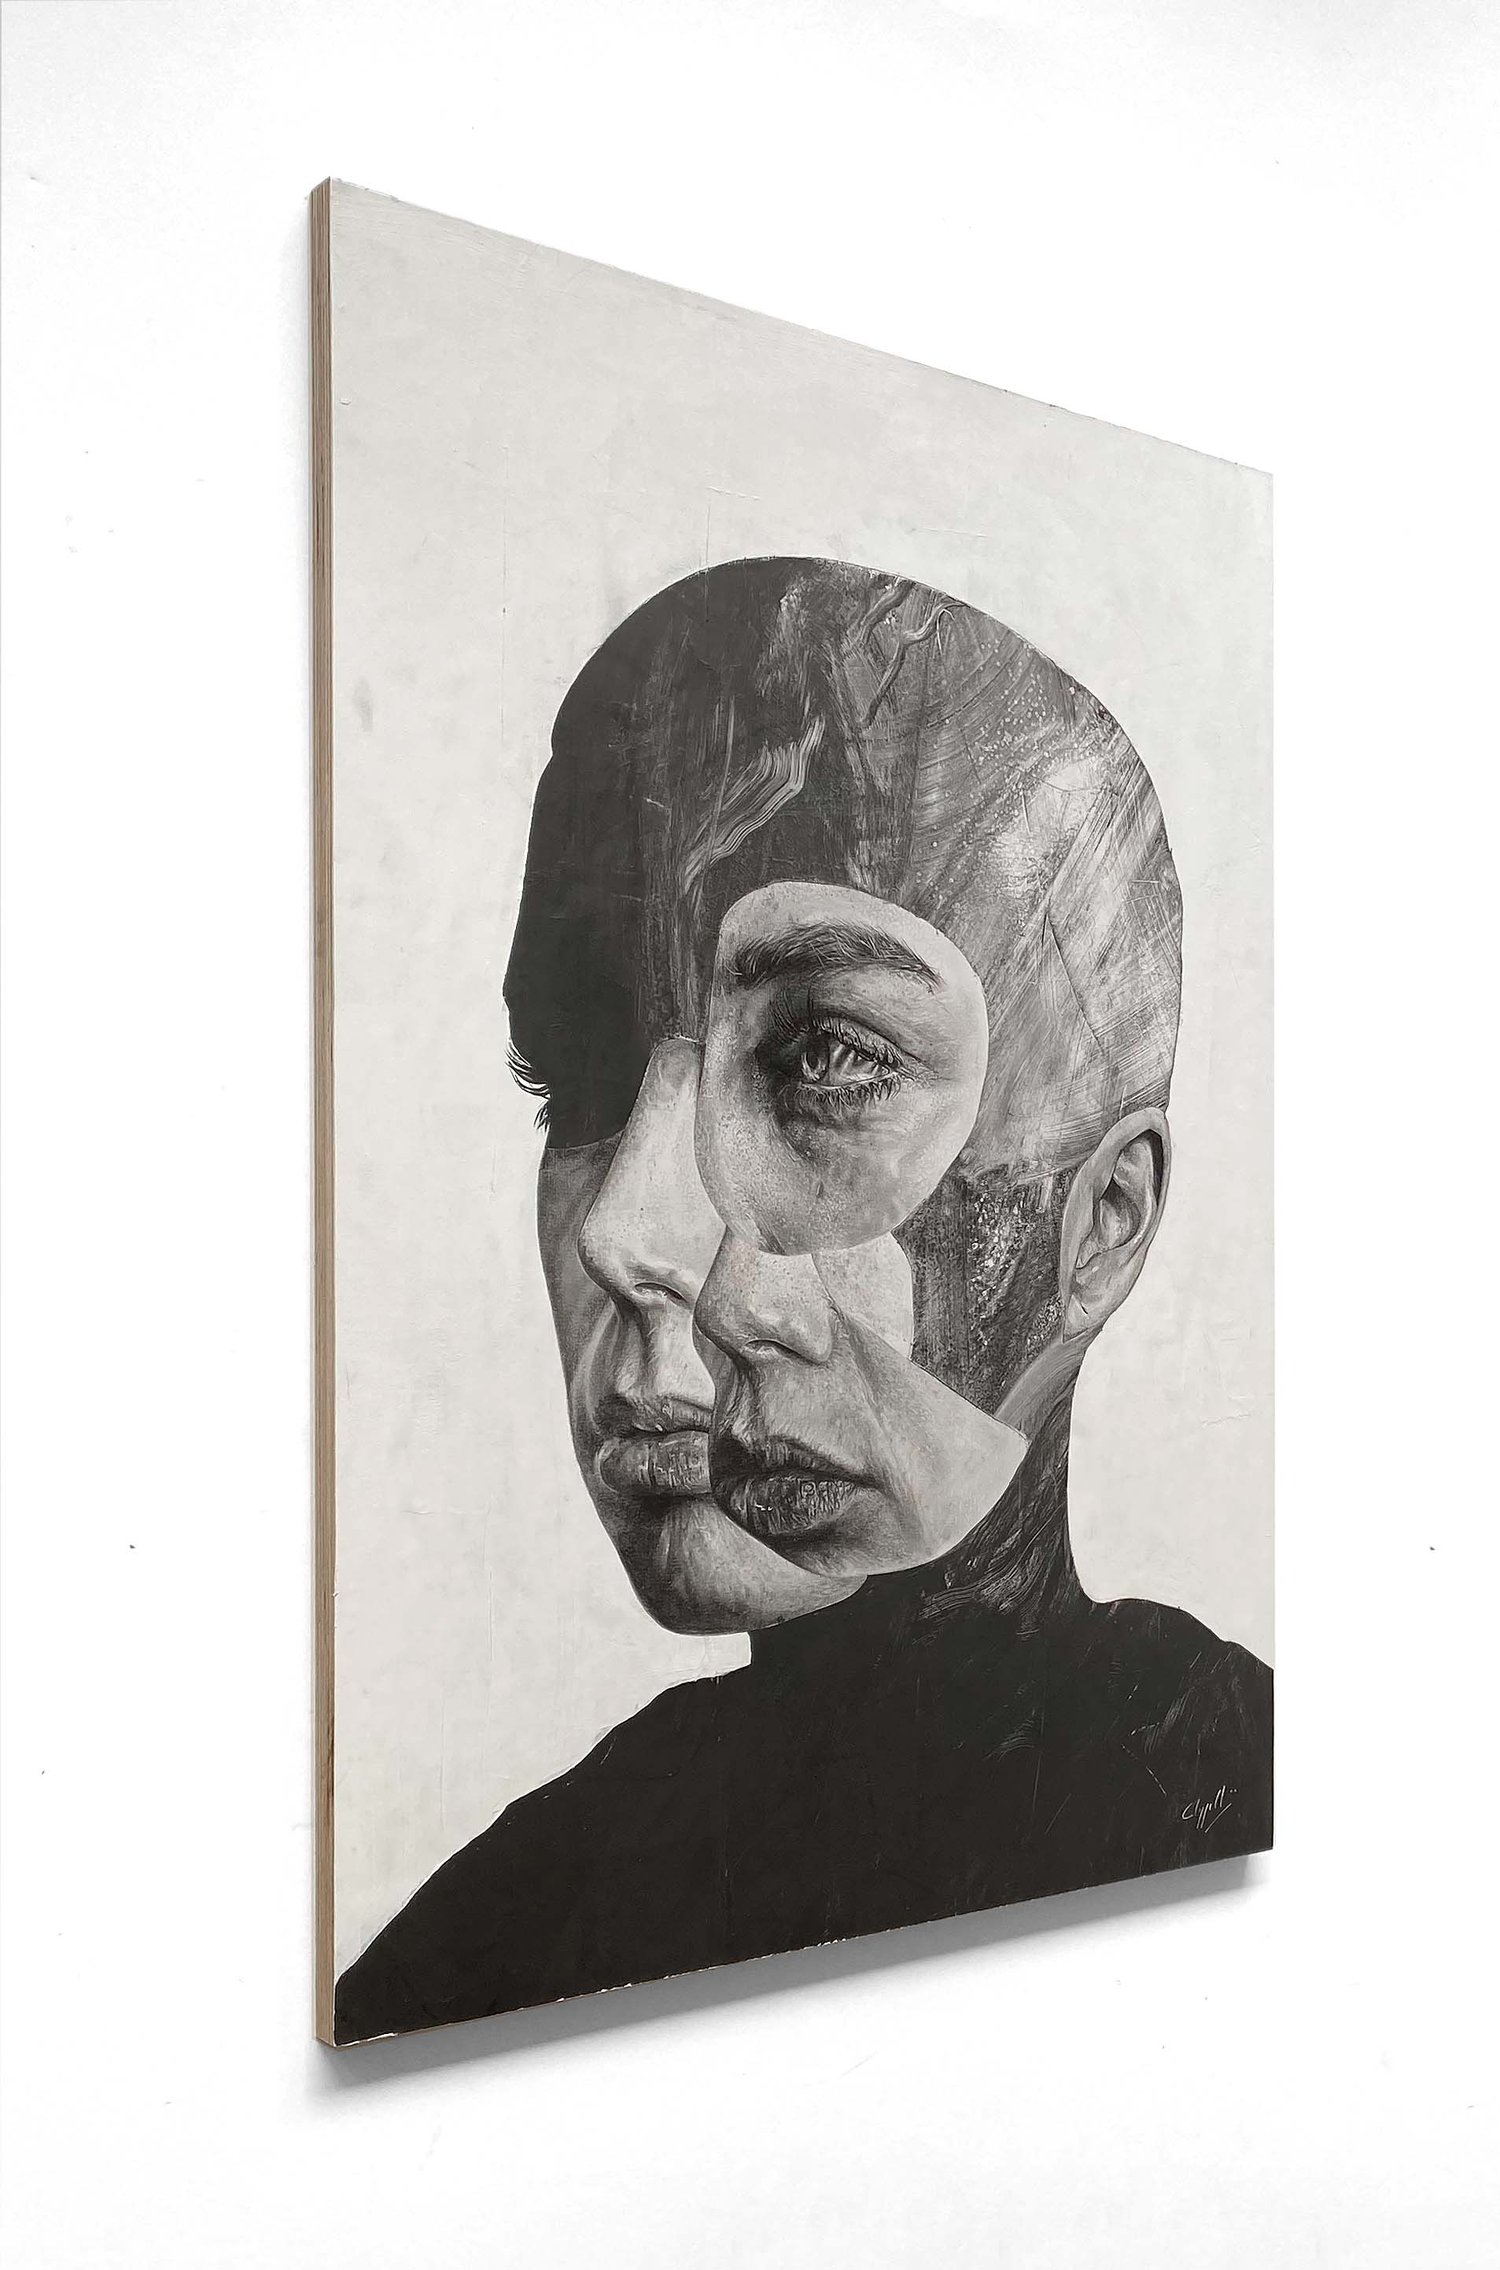 Image of ‘Our own unknown face’ by Alexander Chappell